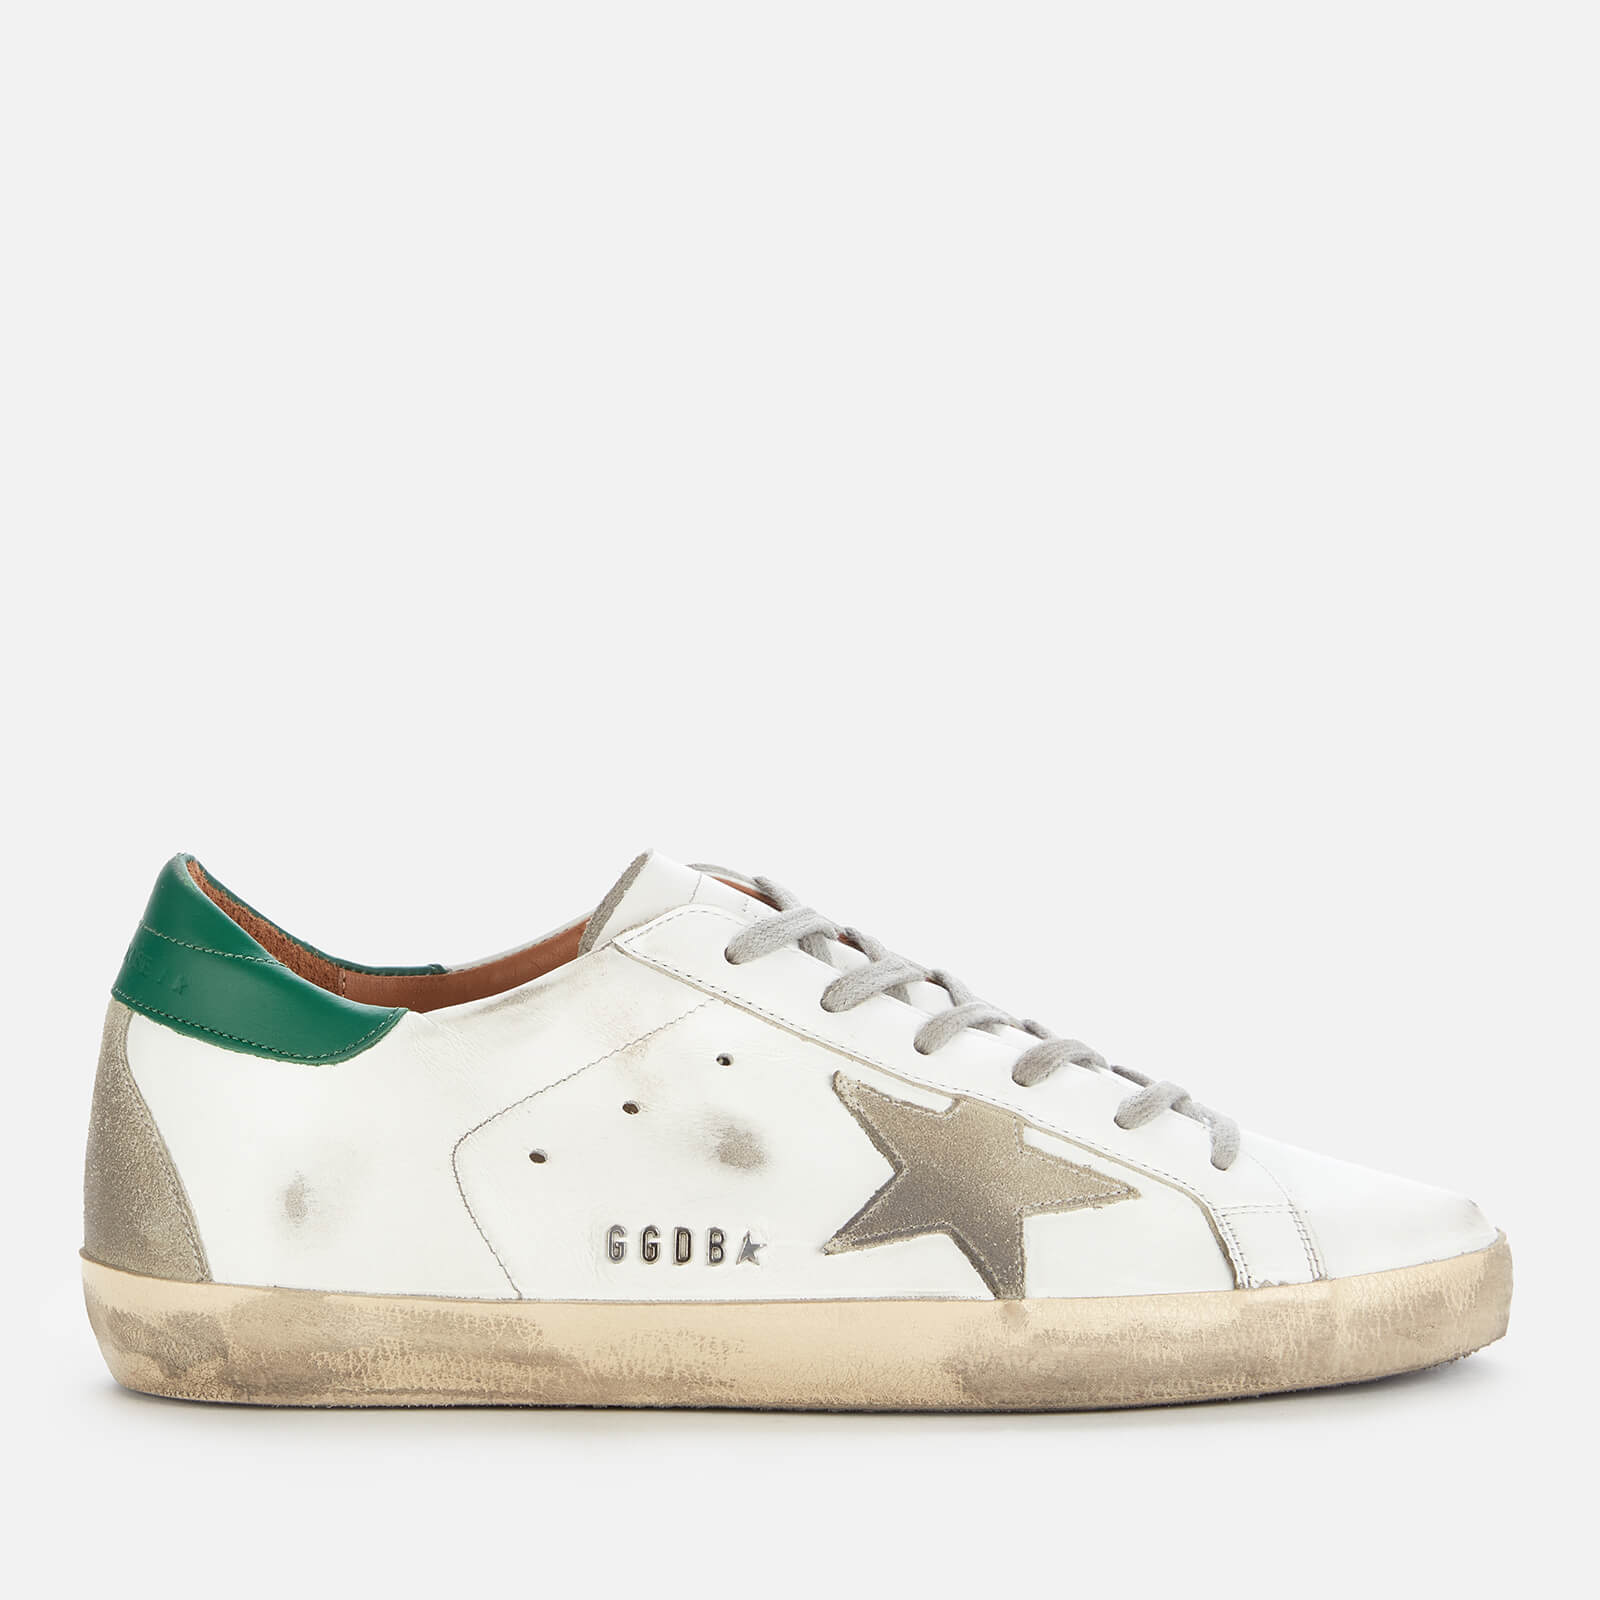 Golden Goose Deluxe Brand Women's Superstar Leather Trainers - White/Ice/Green - UK 8